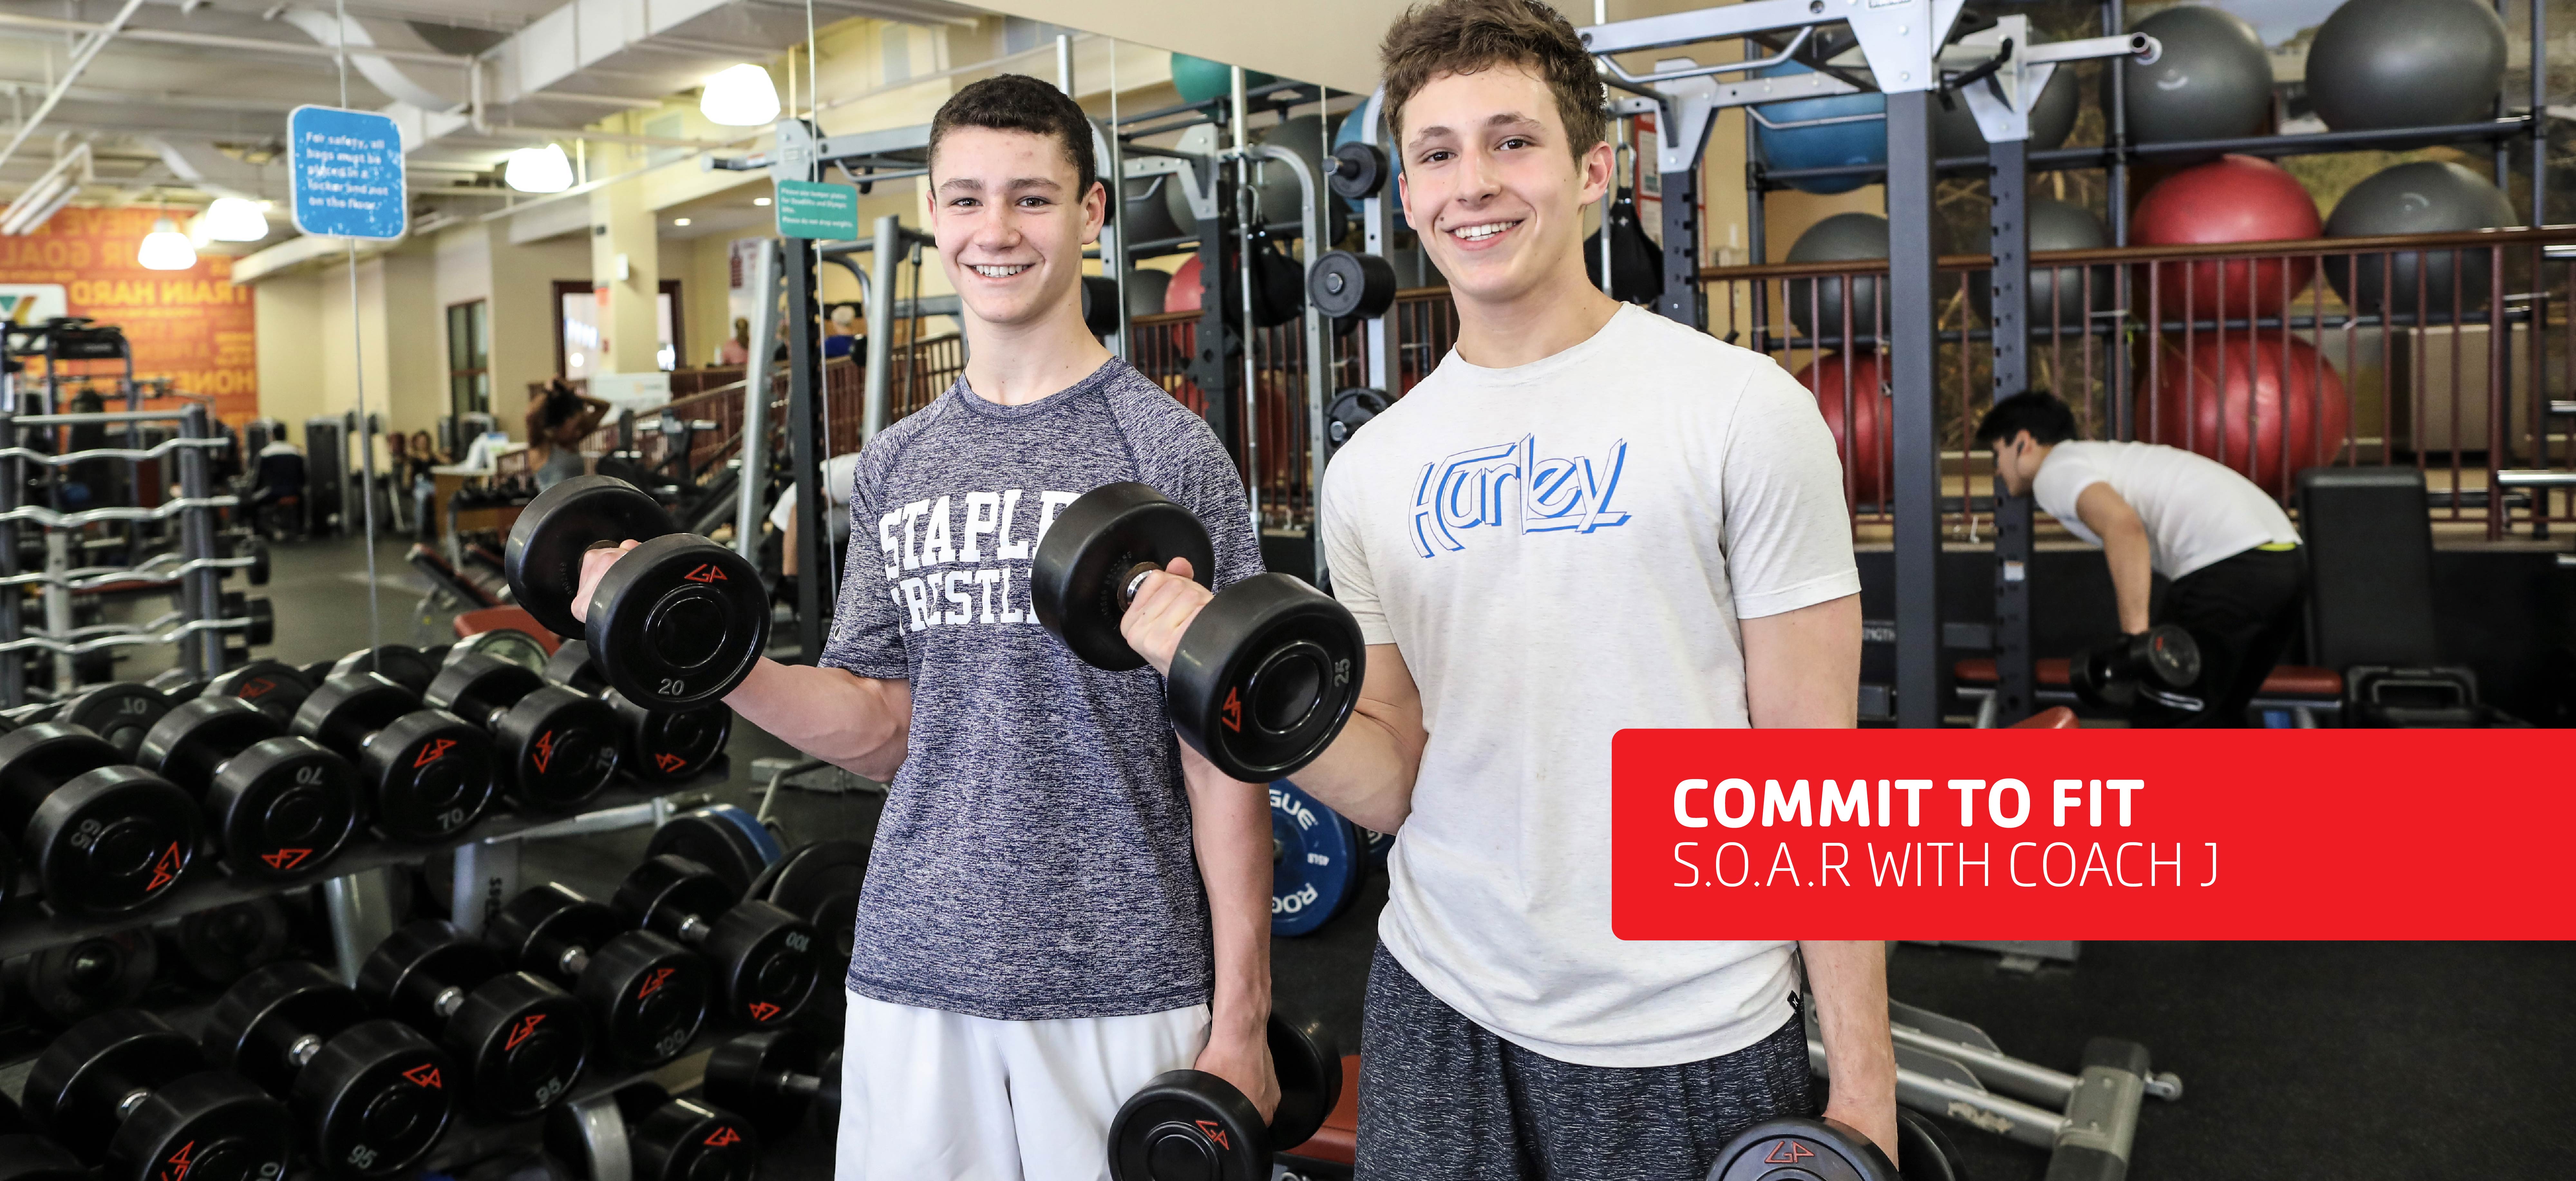 Soar with Coach J. Training and Fitness Class for high school students at the Westport Weston Family YMCA